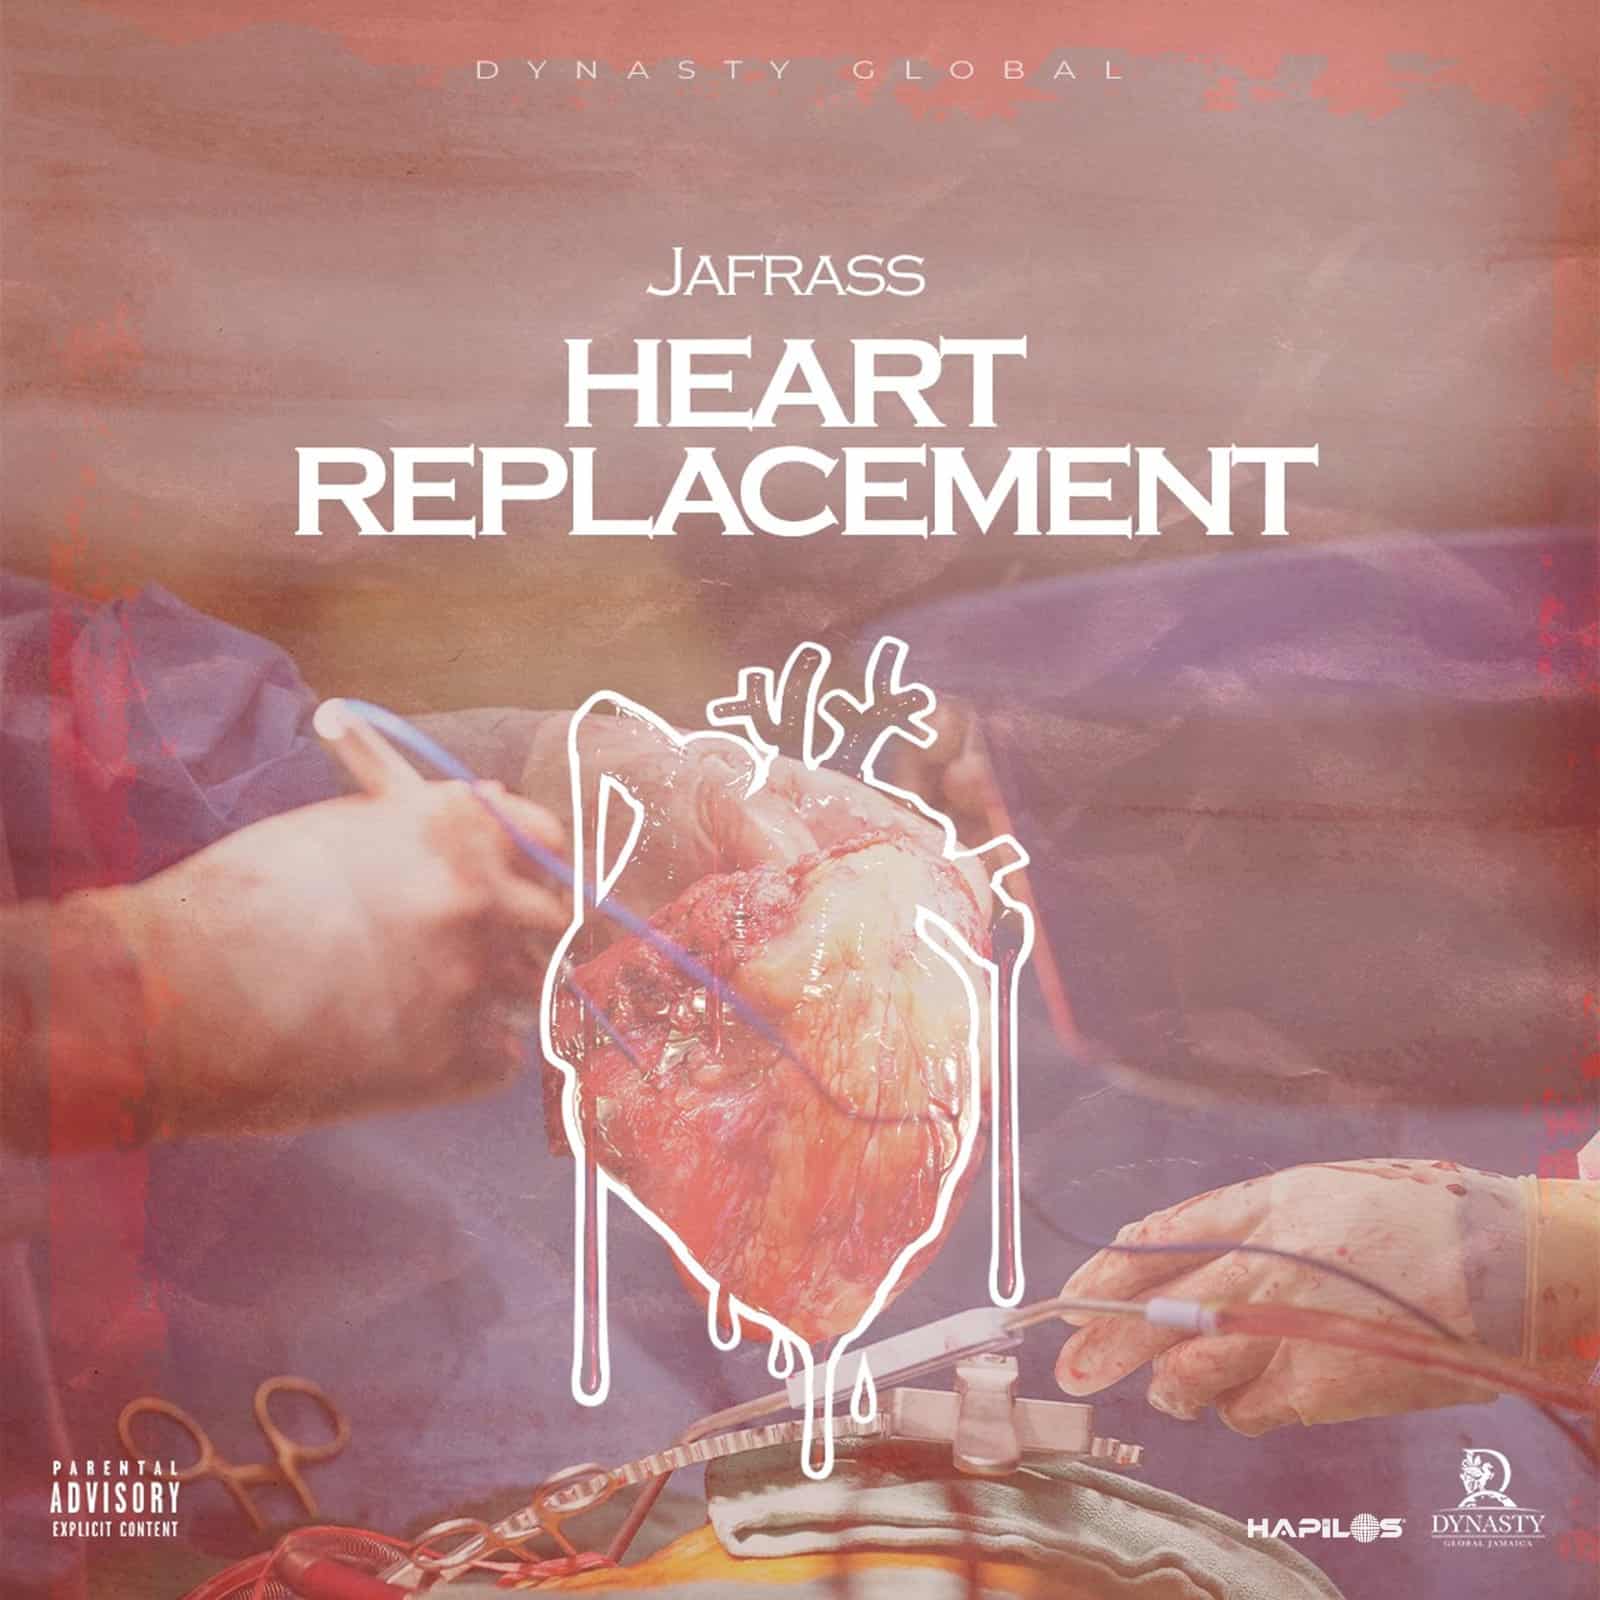 Jafrass - Heart Replacement - Dynasty Global